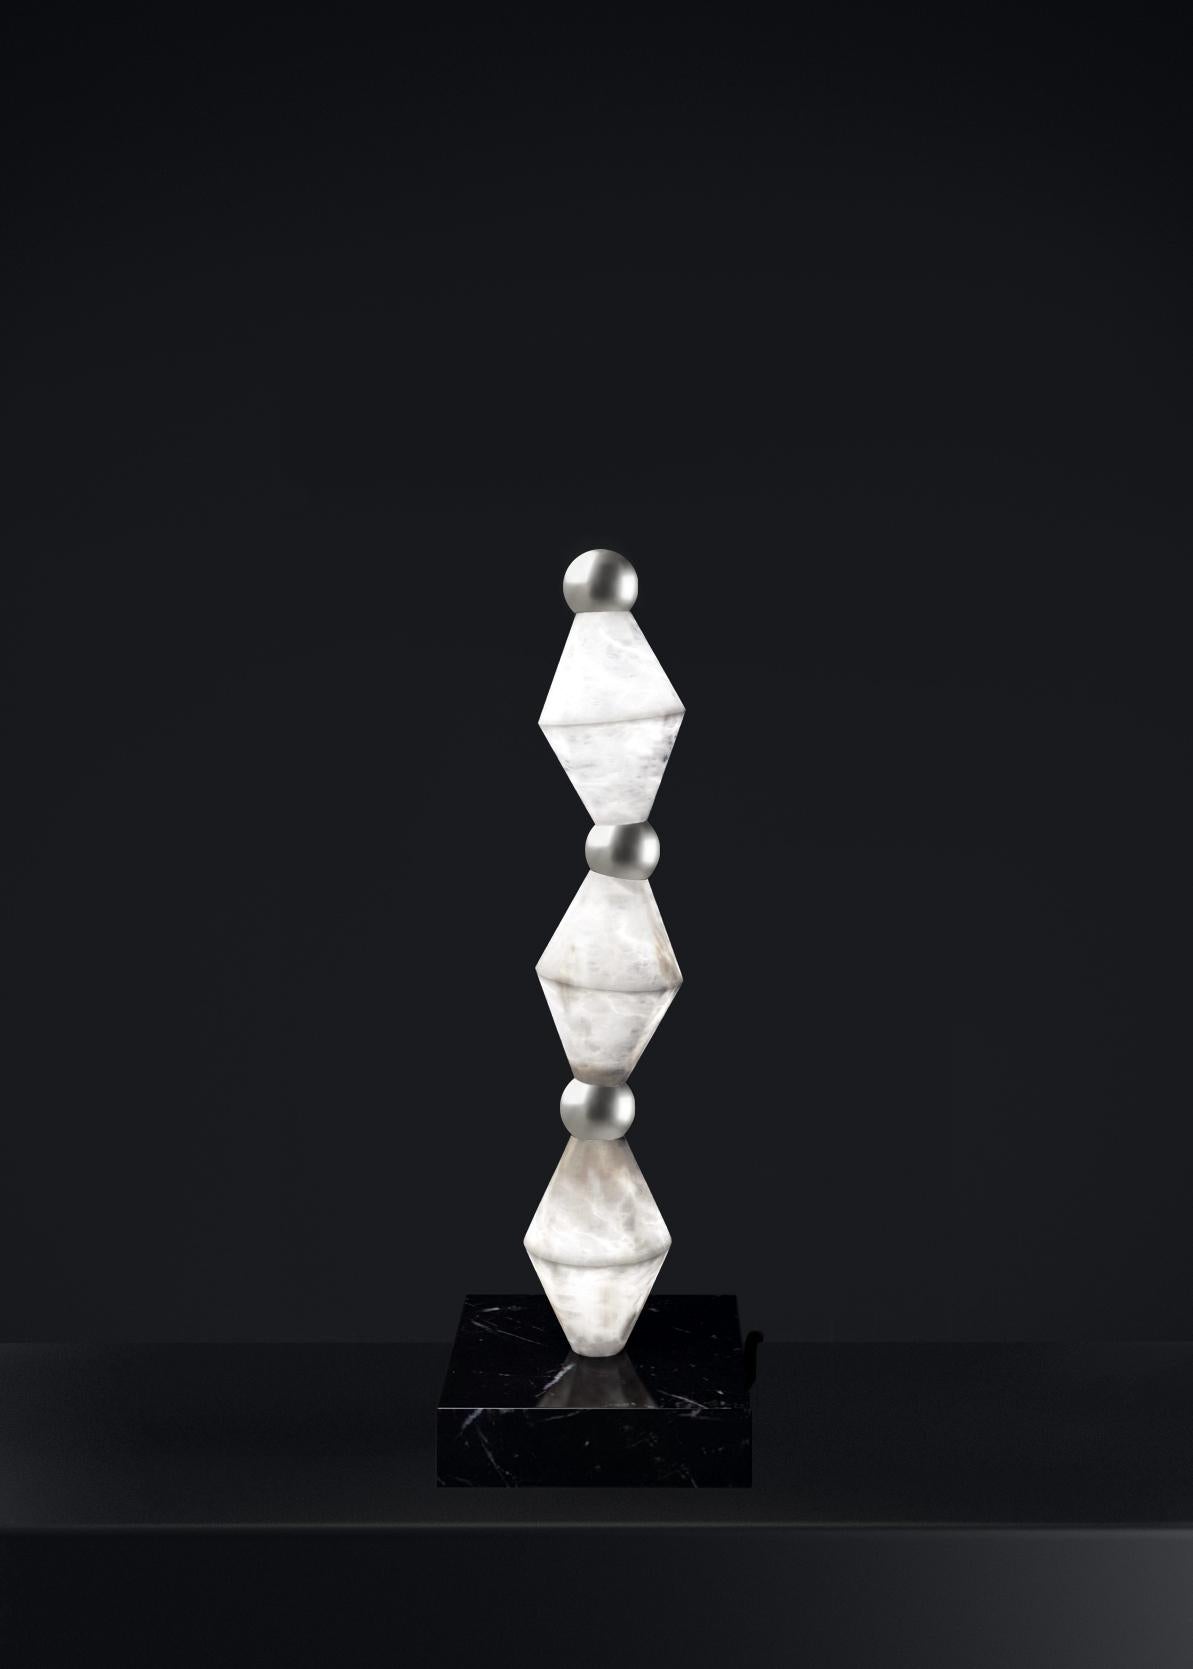 Chronos Shiny Silver Table Lamp by Alabastro Italiano
Dimensions: D 15 x W 15 x H 71,5 cm.
Materials: White alabaster, marble and metal.

Available in different finishes: Shiny Silver, Bronze, Brushed Brass, Ruggine of Florence, Brushed Burnished,